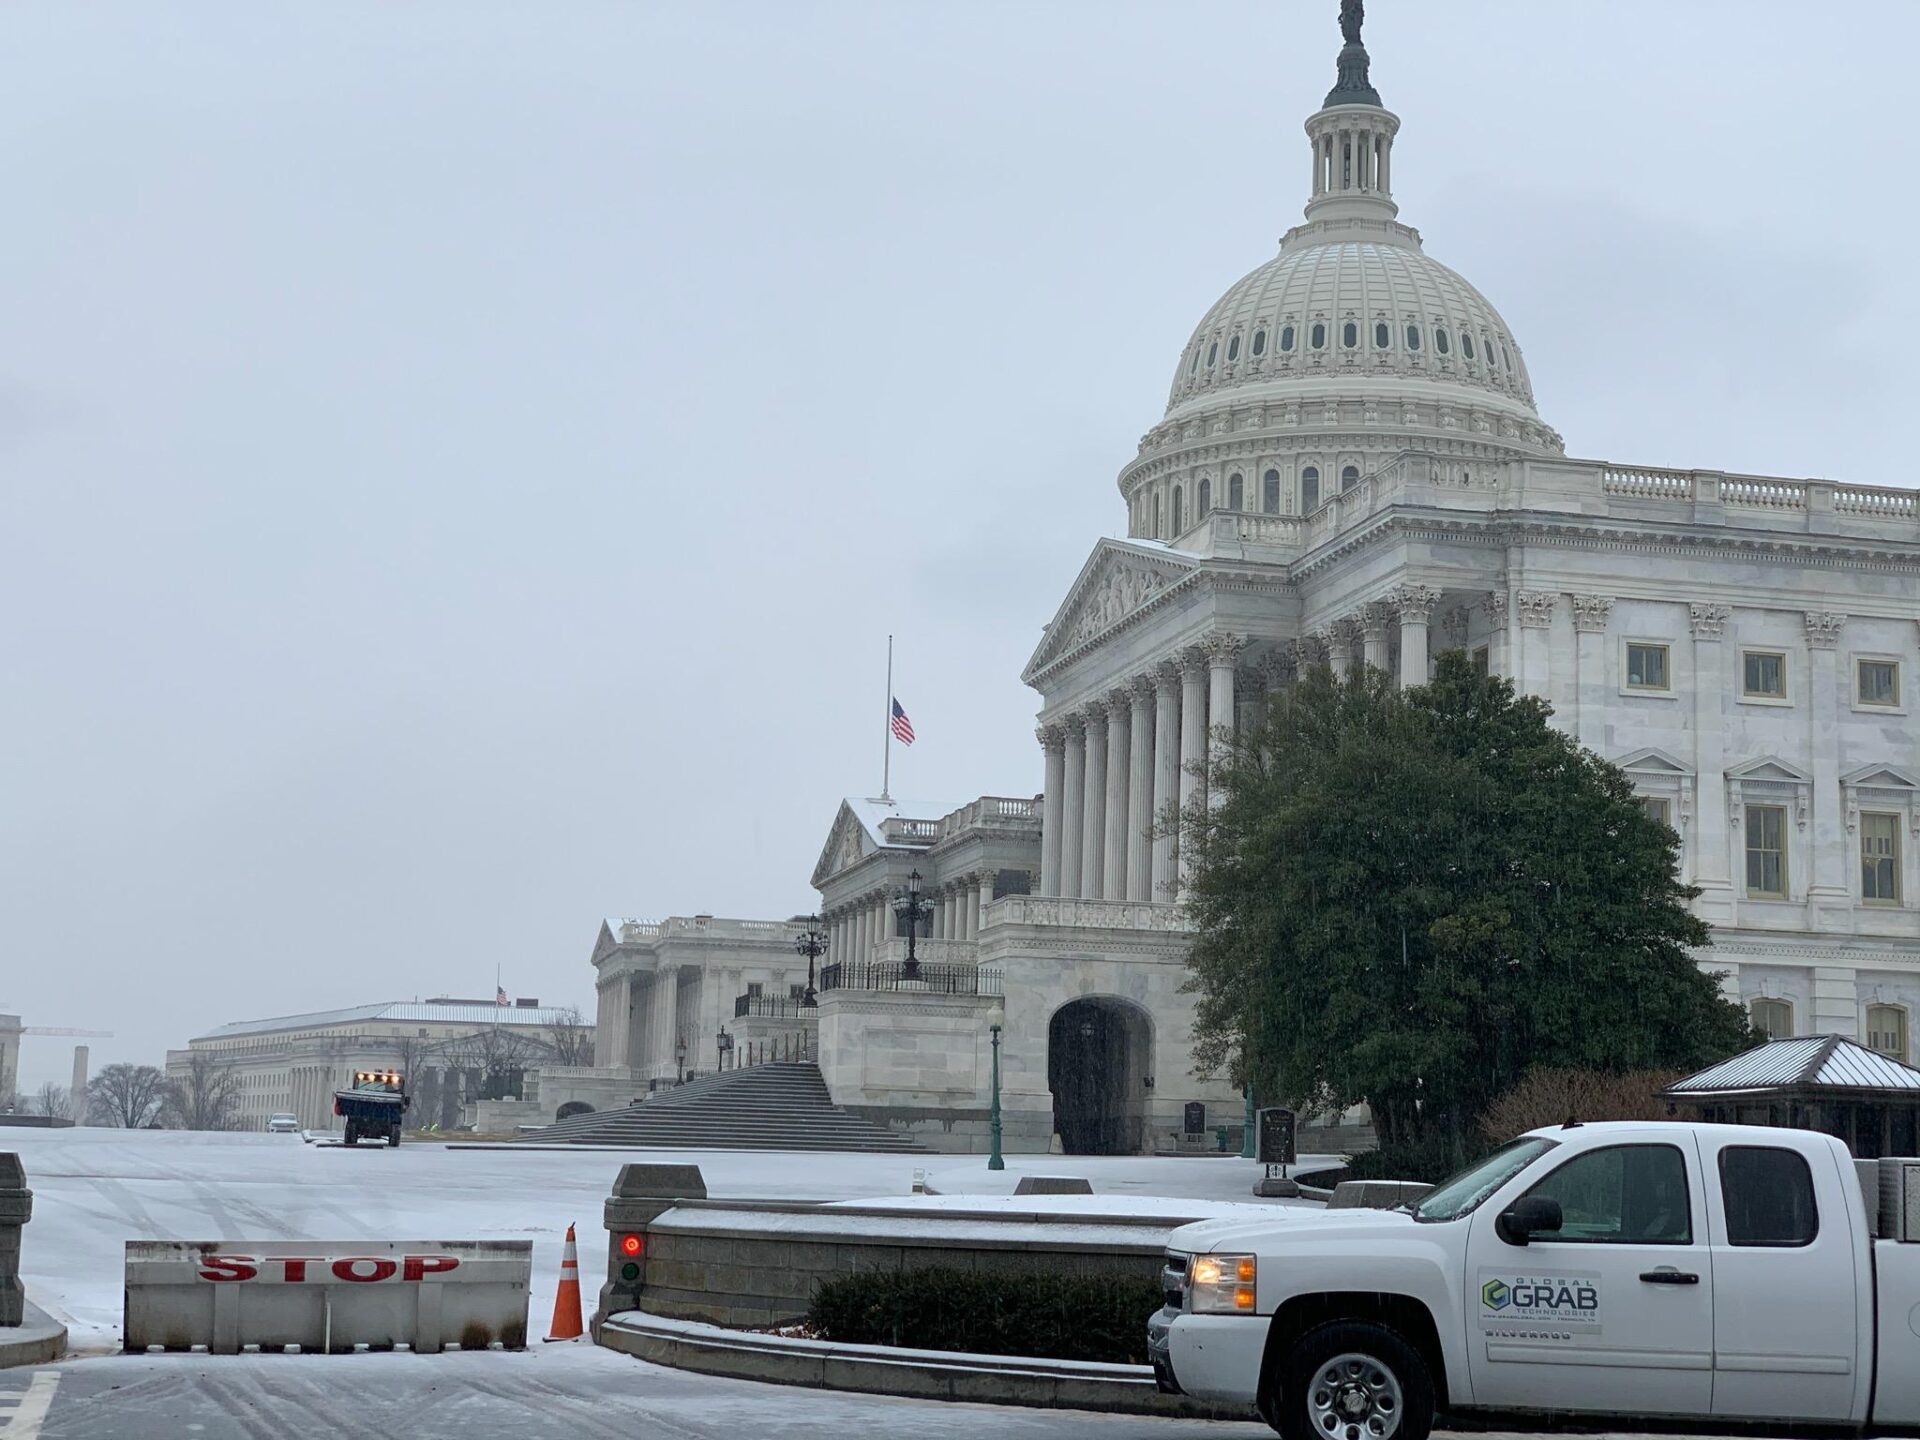 Global GRAB Supporting U.S. Capitol Police 2021